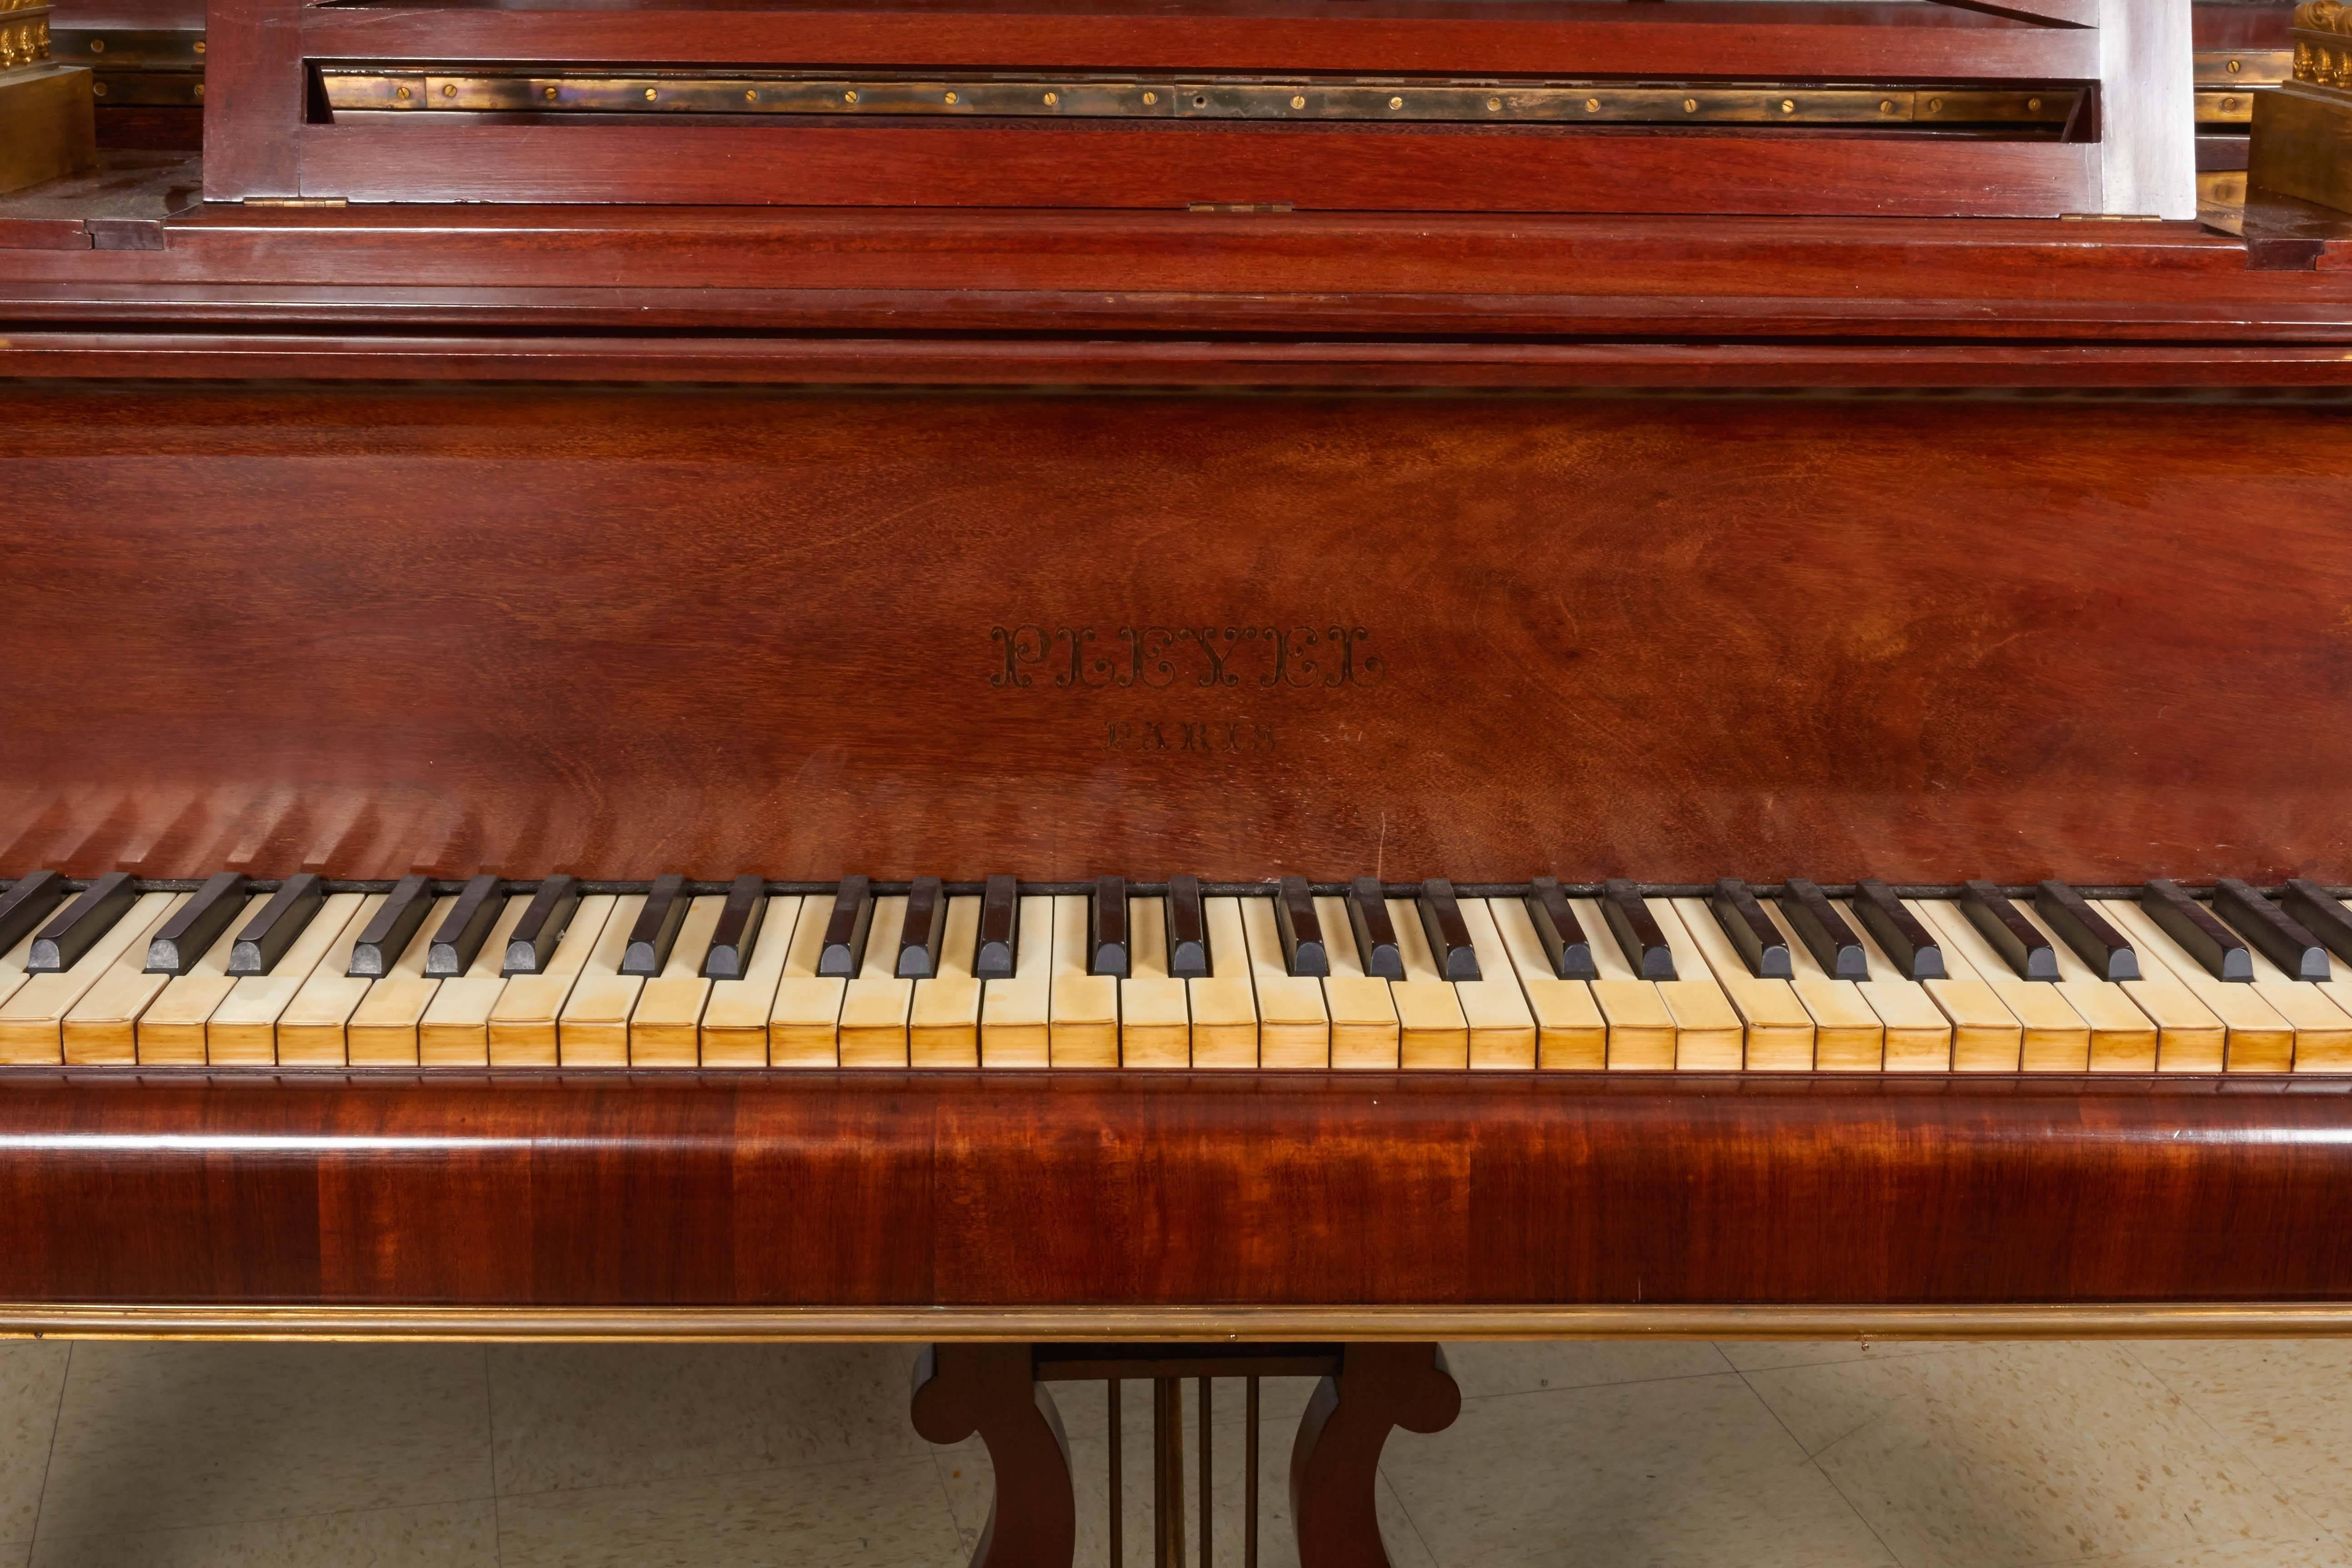 19th Century French Ormolu-Mounted Kingwood and Vernis Martin Piano by Pleyel and Barbedienne